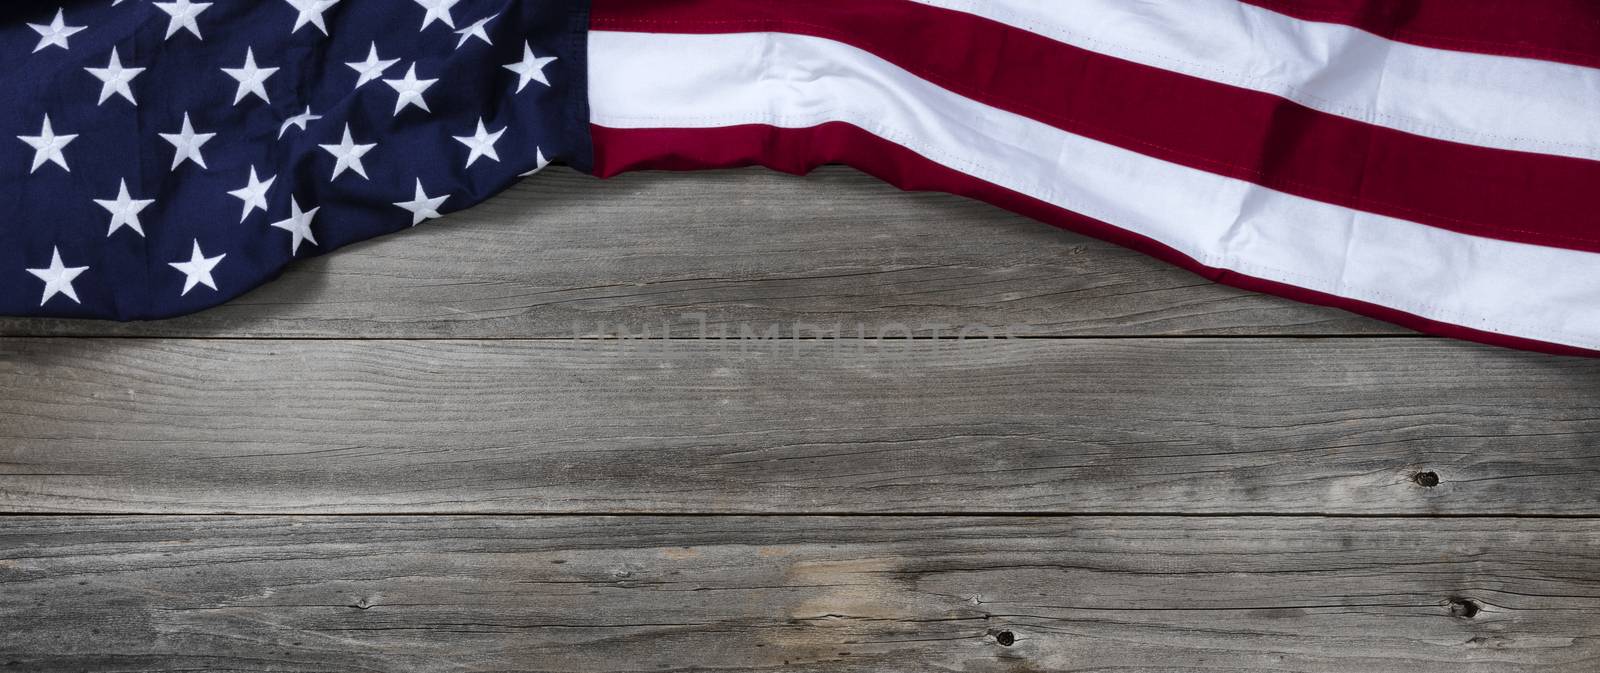 United States flag forming upper border on rustic wooden boards by tab1962